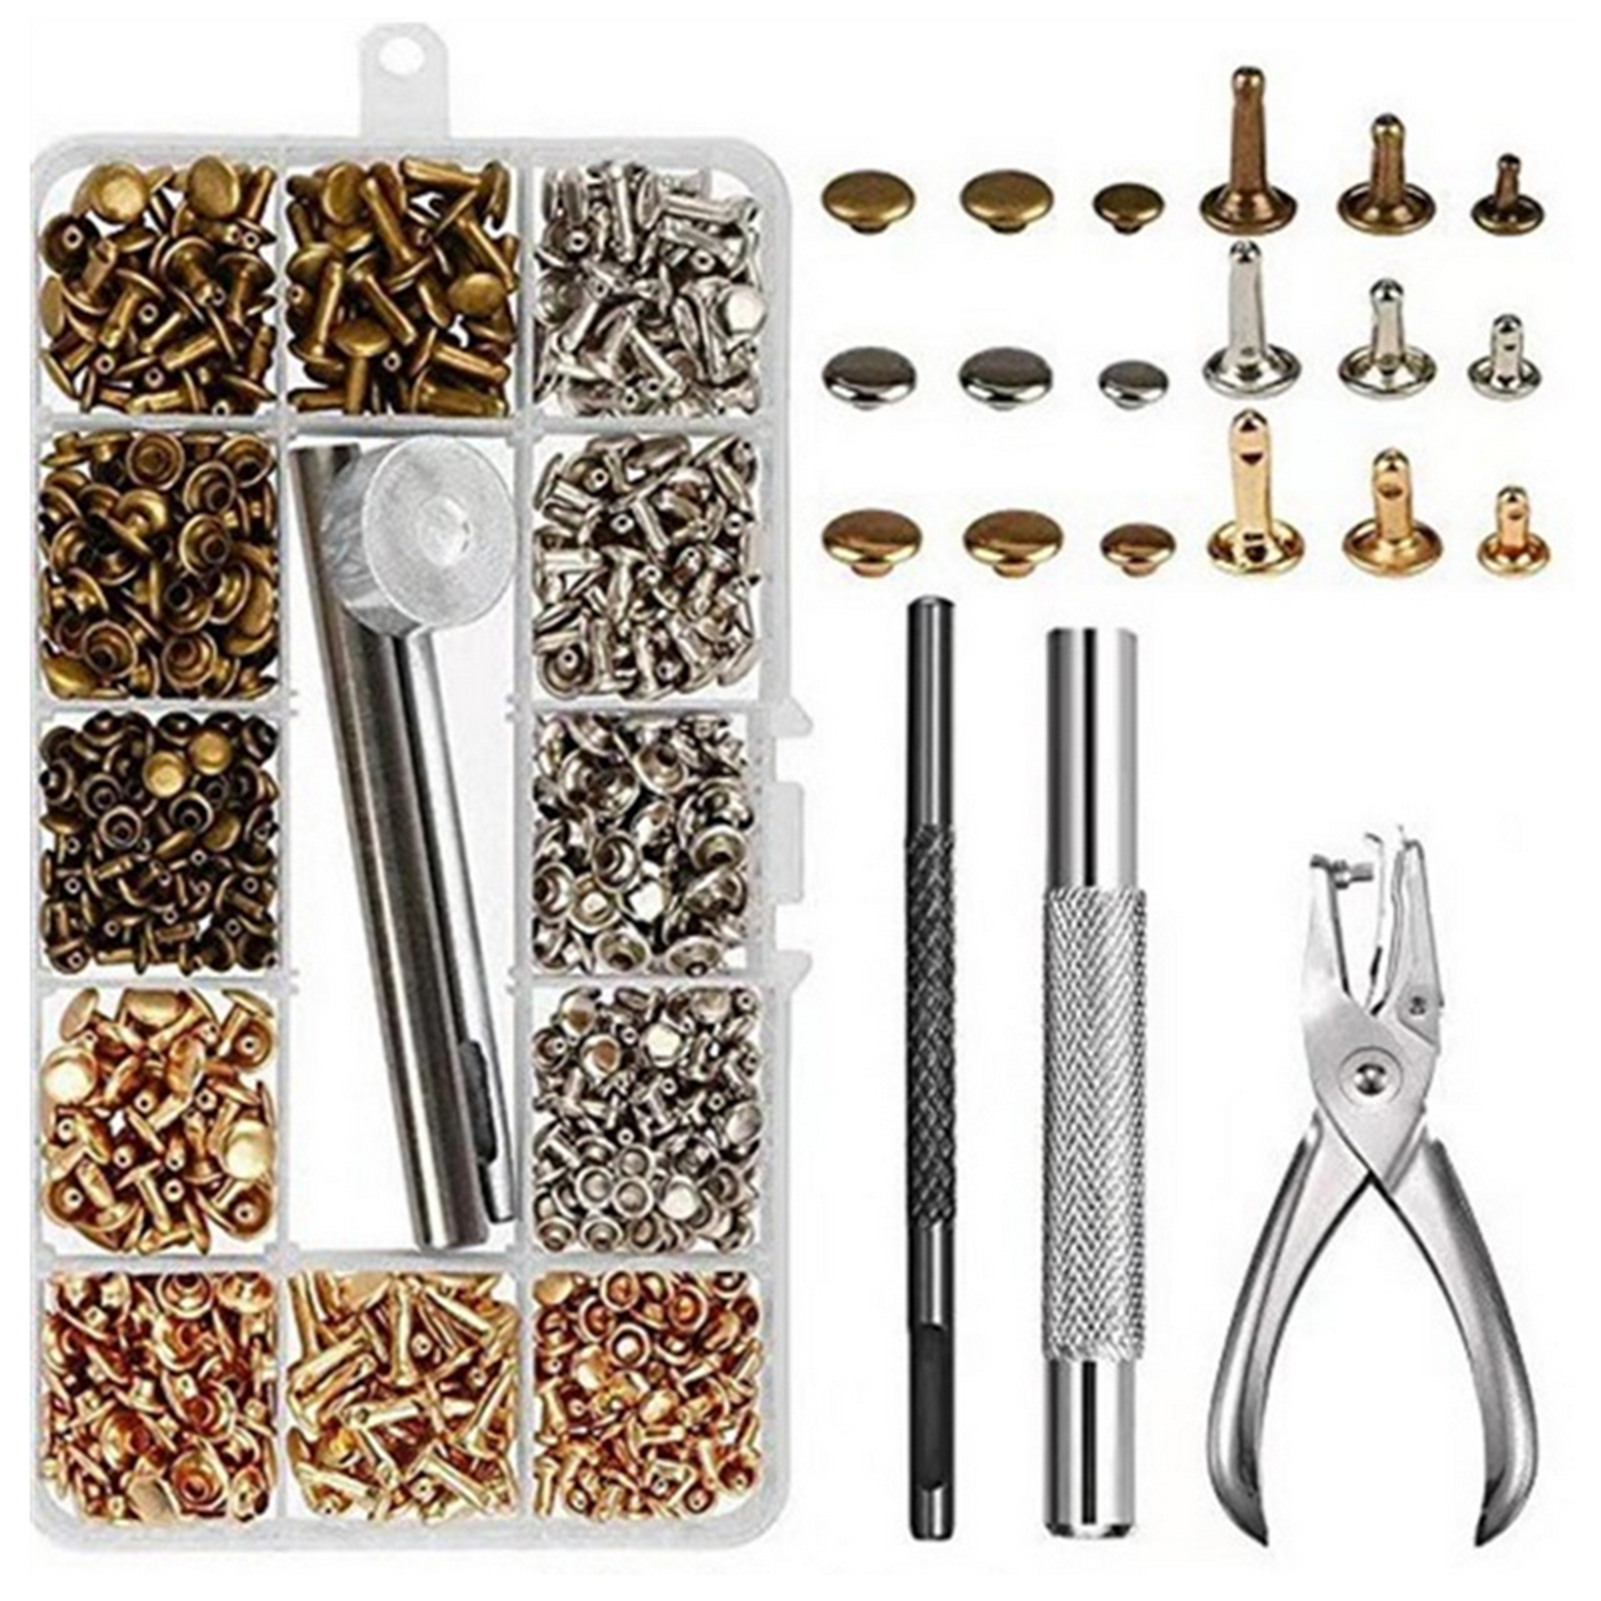 300 Sets Leather Rivets Double Cap Rivet Tubular Metal Studs With Punch  Pliers Fixing Set Tools For Diy Leather Craft